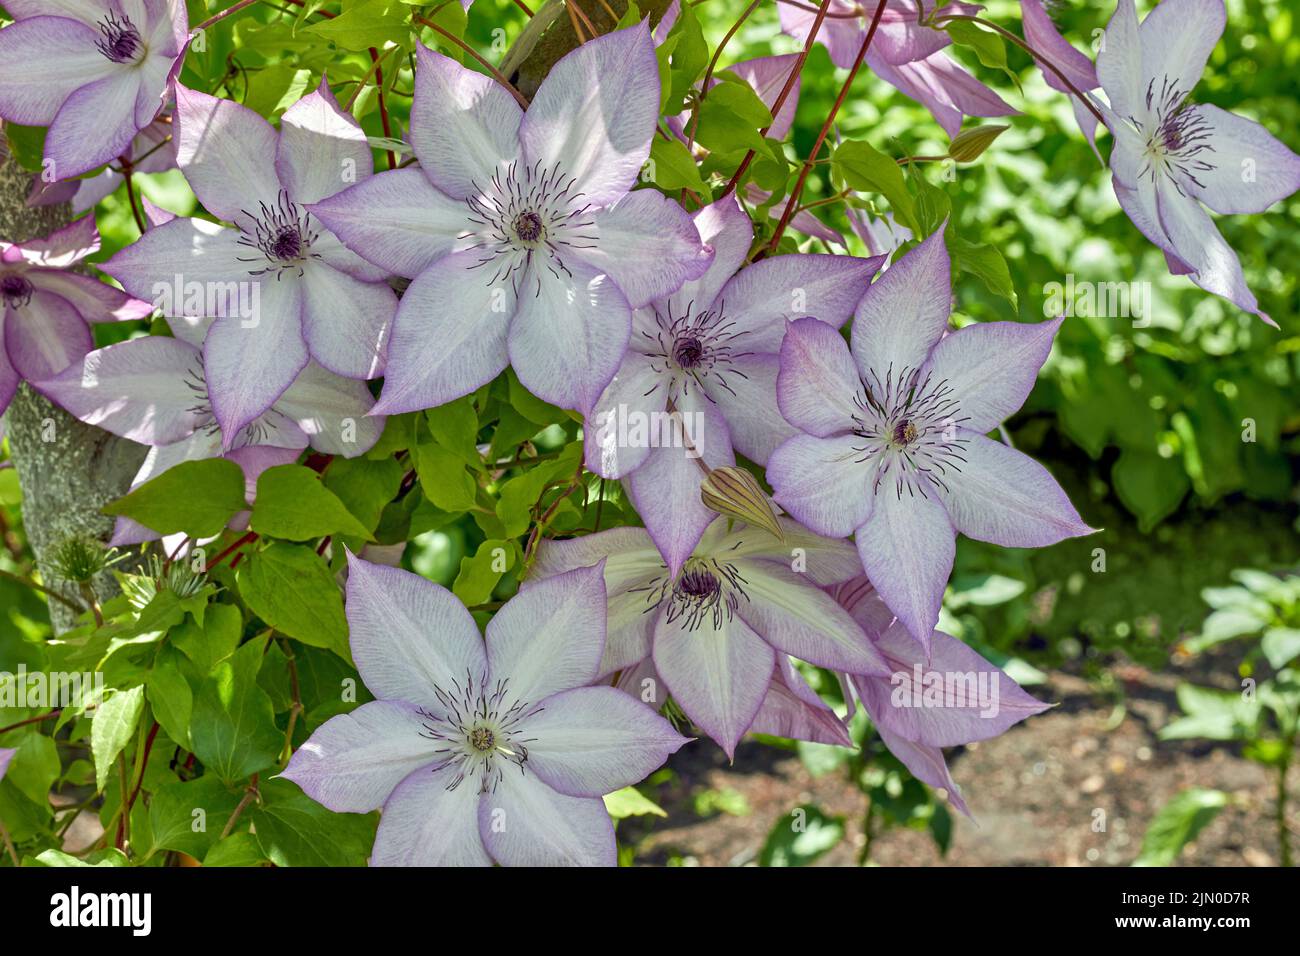 Clematis Blue Ange flowers in sunny green garden or park in summer Stock Photo